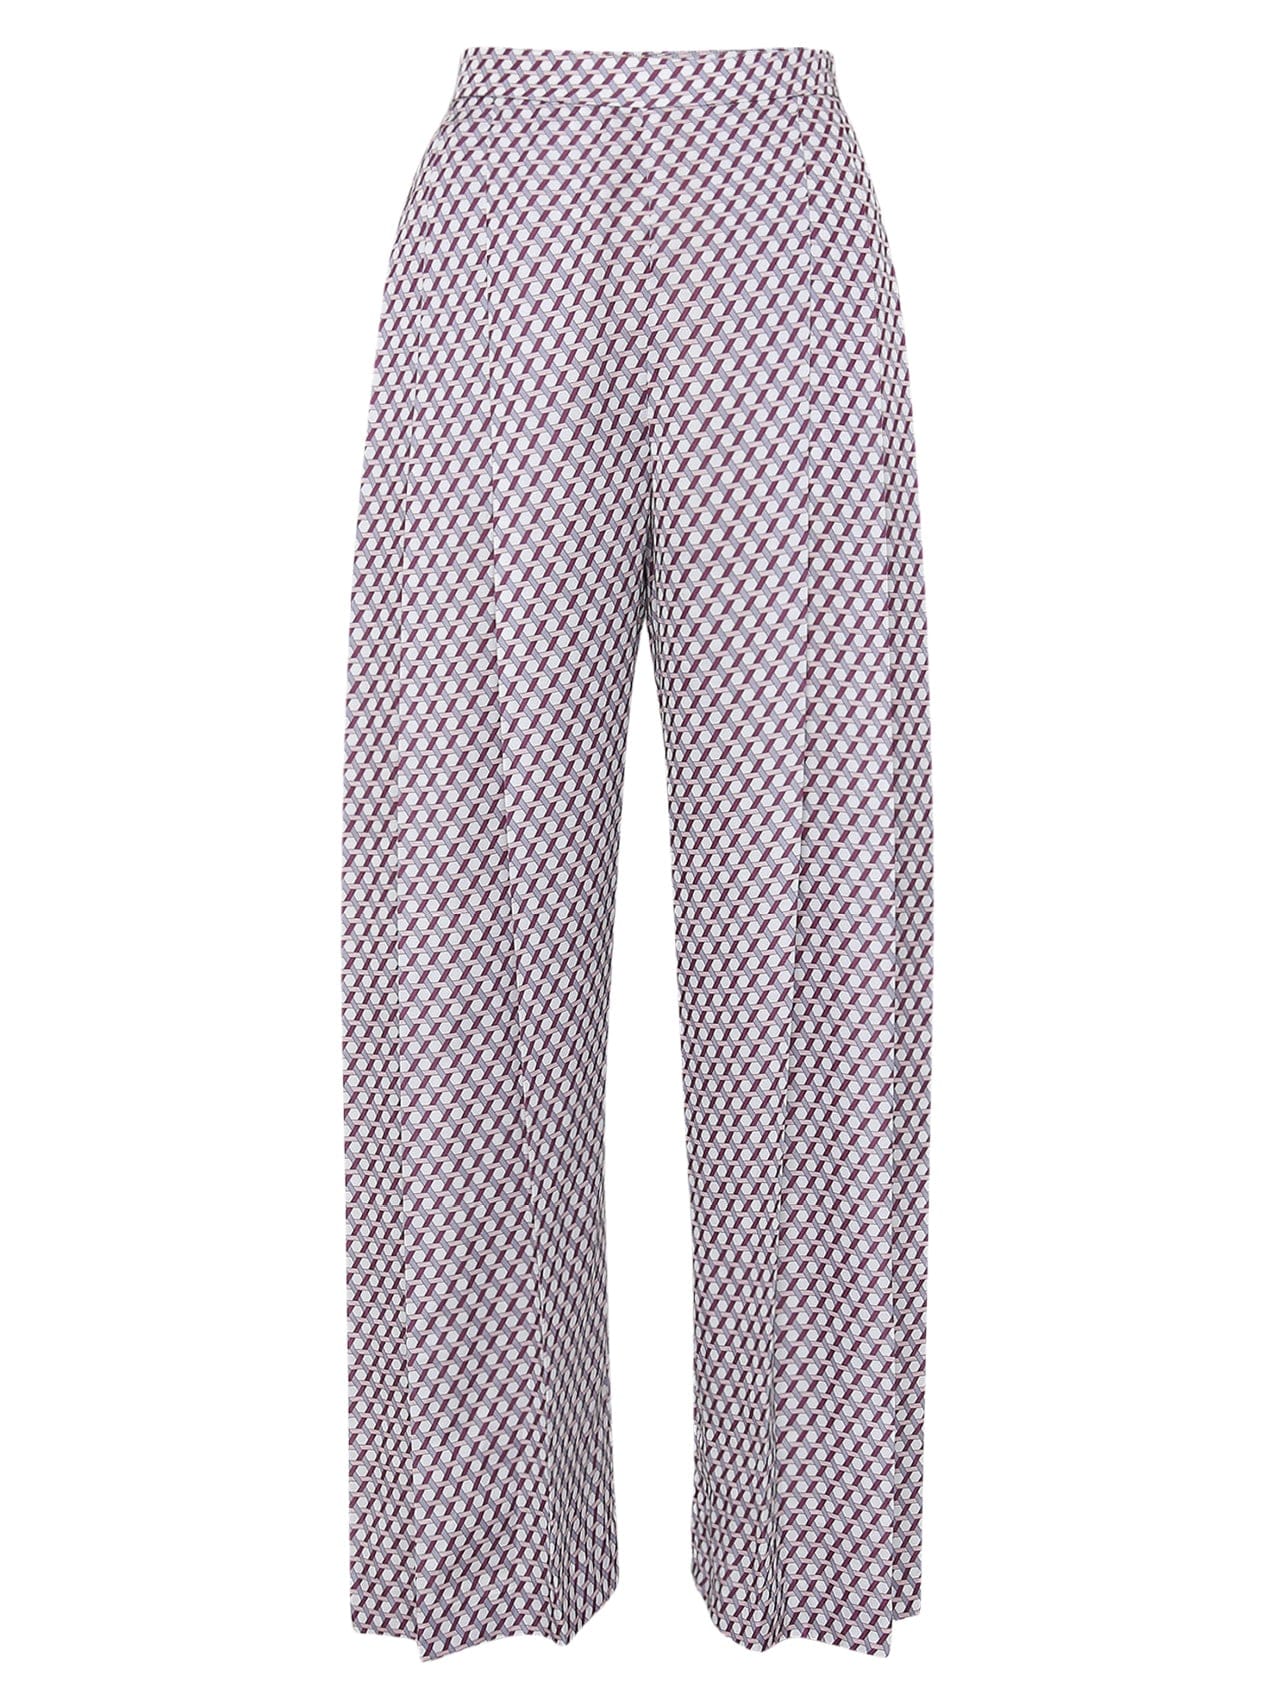 Ladies Printed Pant Manufacturer Supplier from Faridabad India